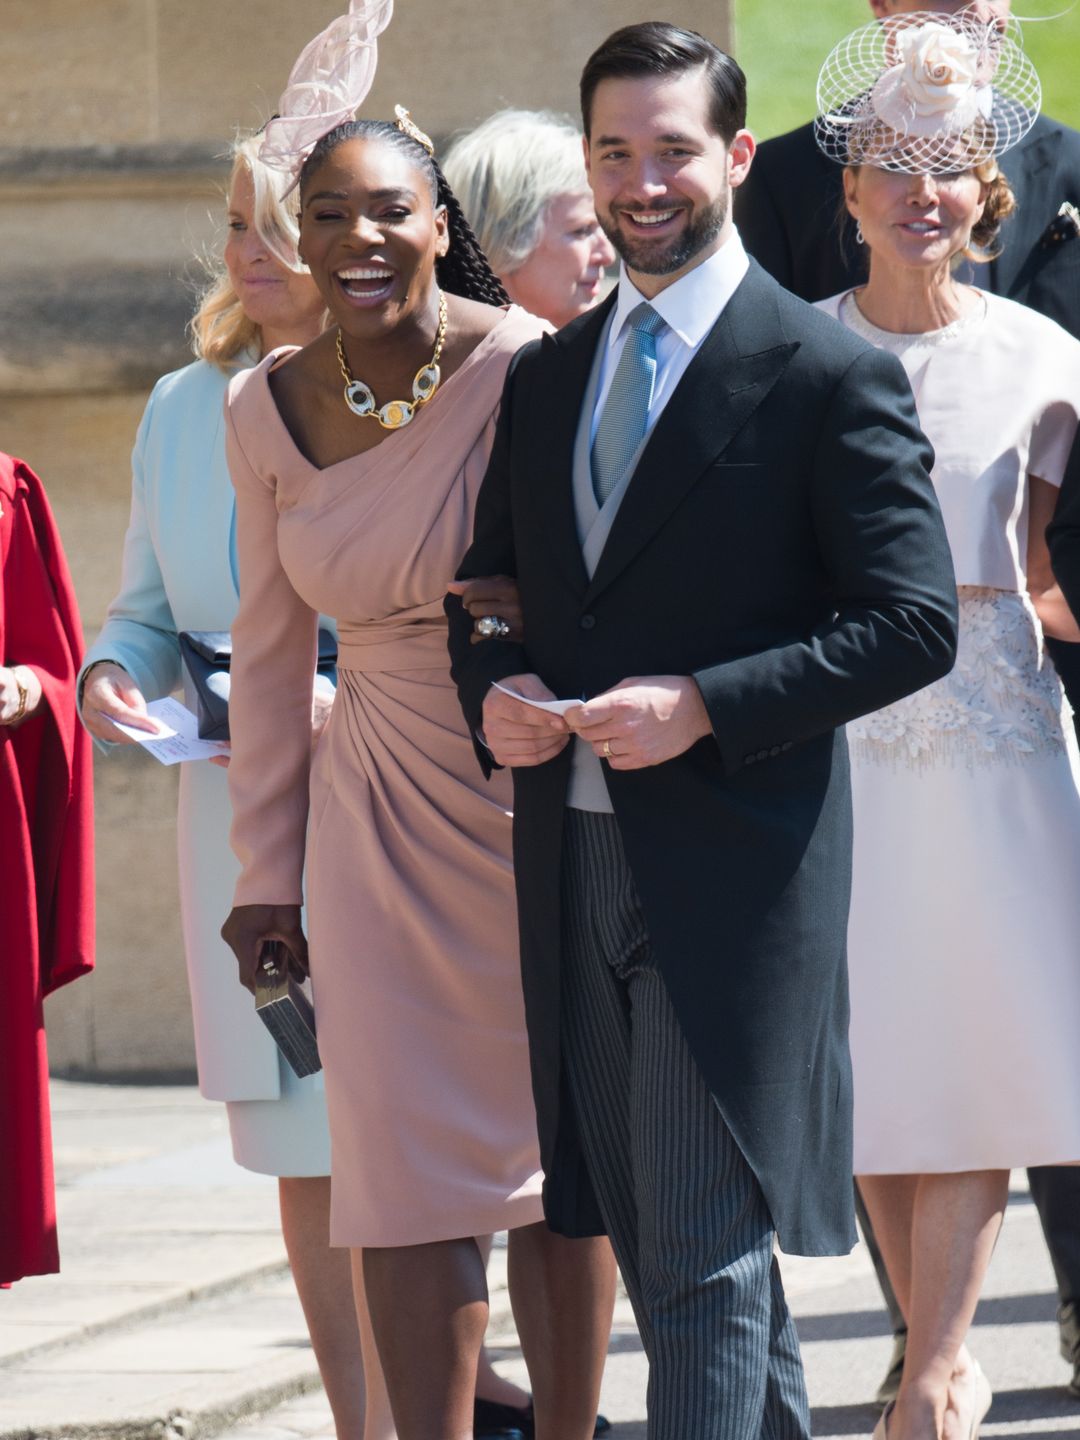 Serena and her husband Alexis smiling as they walk into Windsor for the wedding of Prince Harry and Meghan Markle